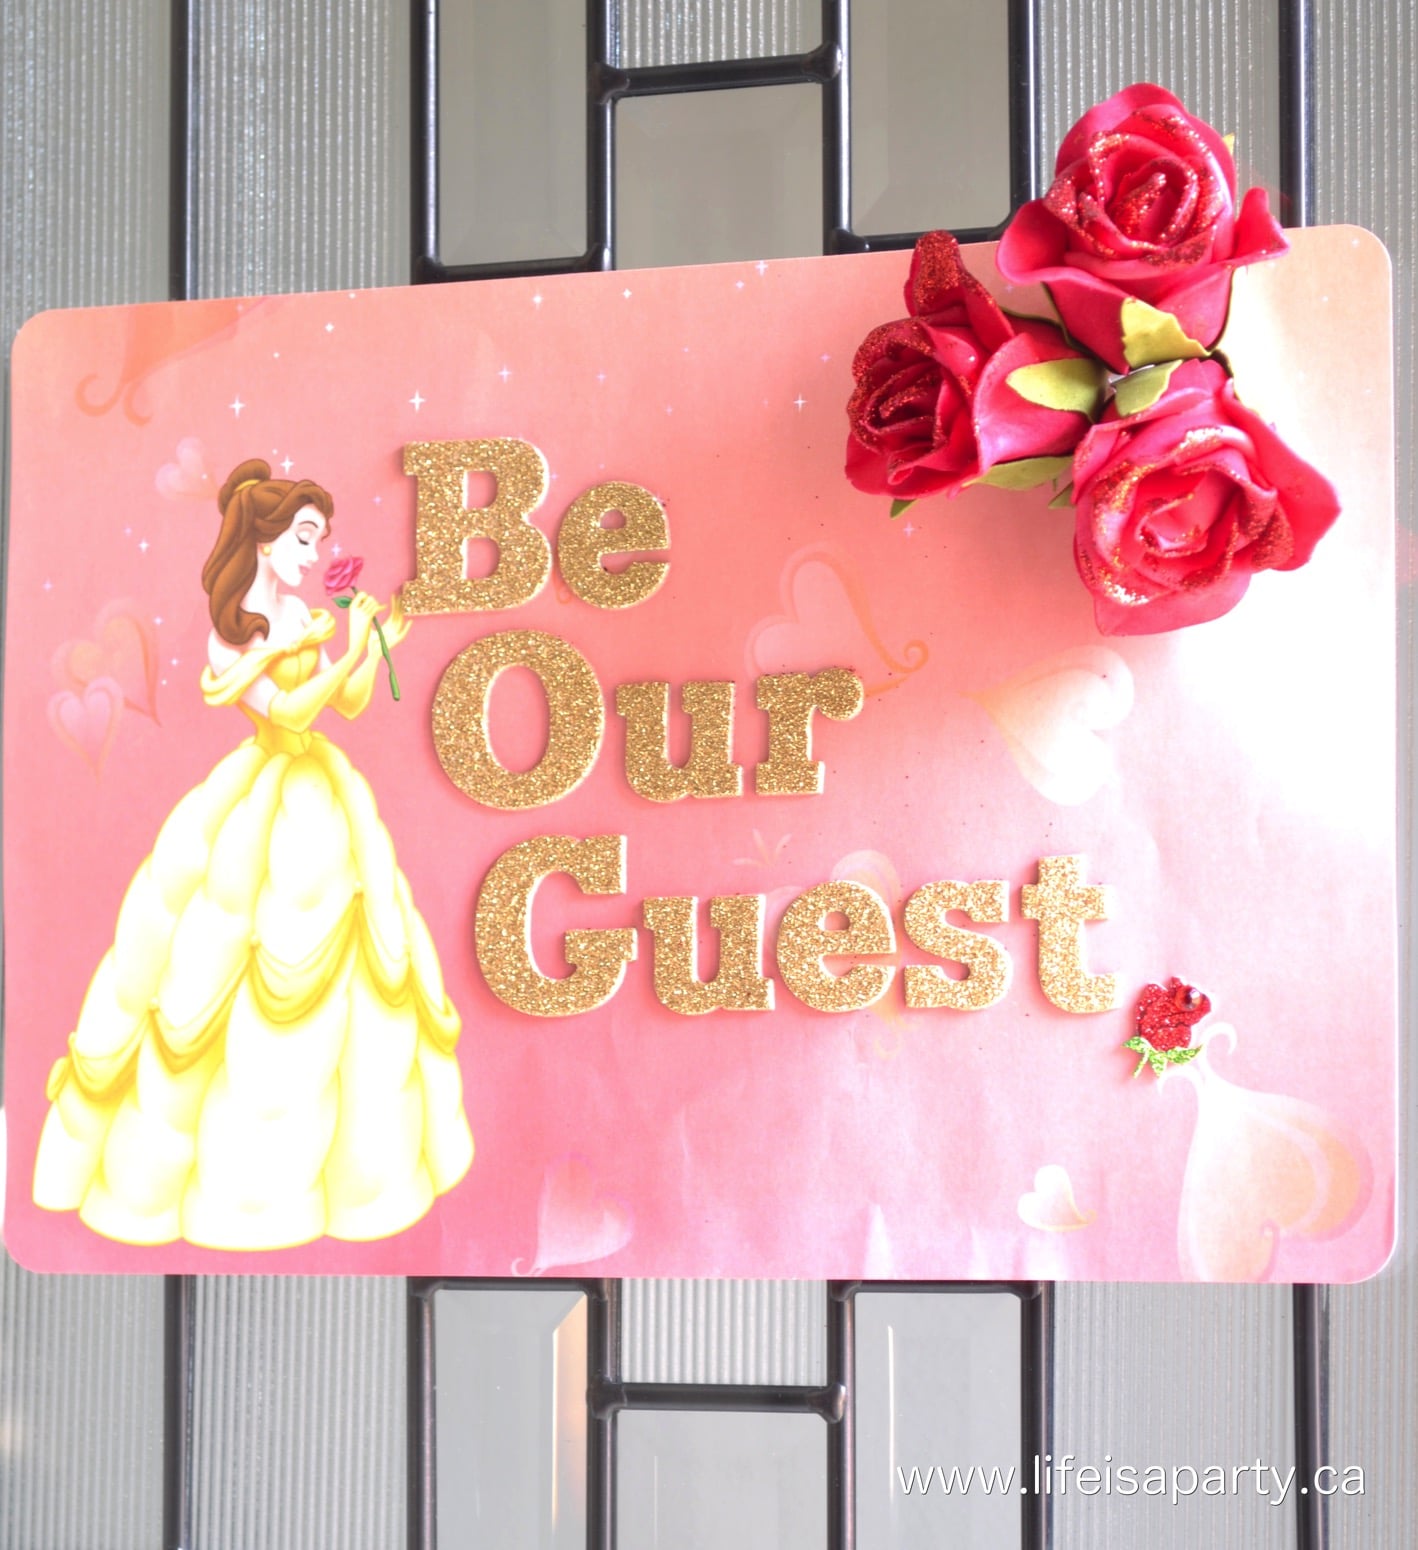 Beauty and the Beast Party Decorations and Food -An amazing Beauty and the Beast themed birthday party, with amazing decorations, and home made party food that all fit the theme. Lots of amazing ideas here and lots of them made out of simple dollar store items.